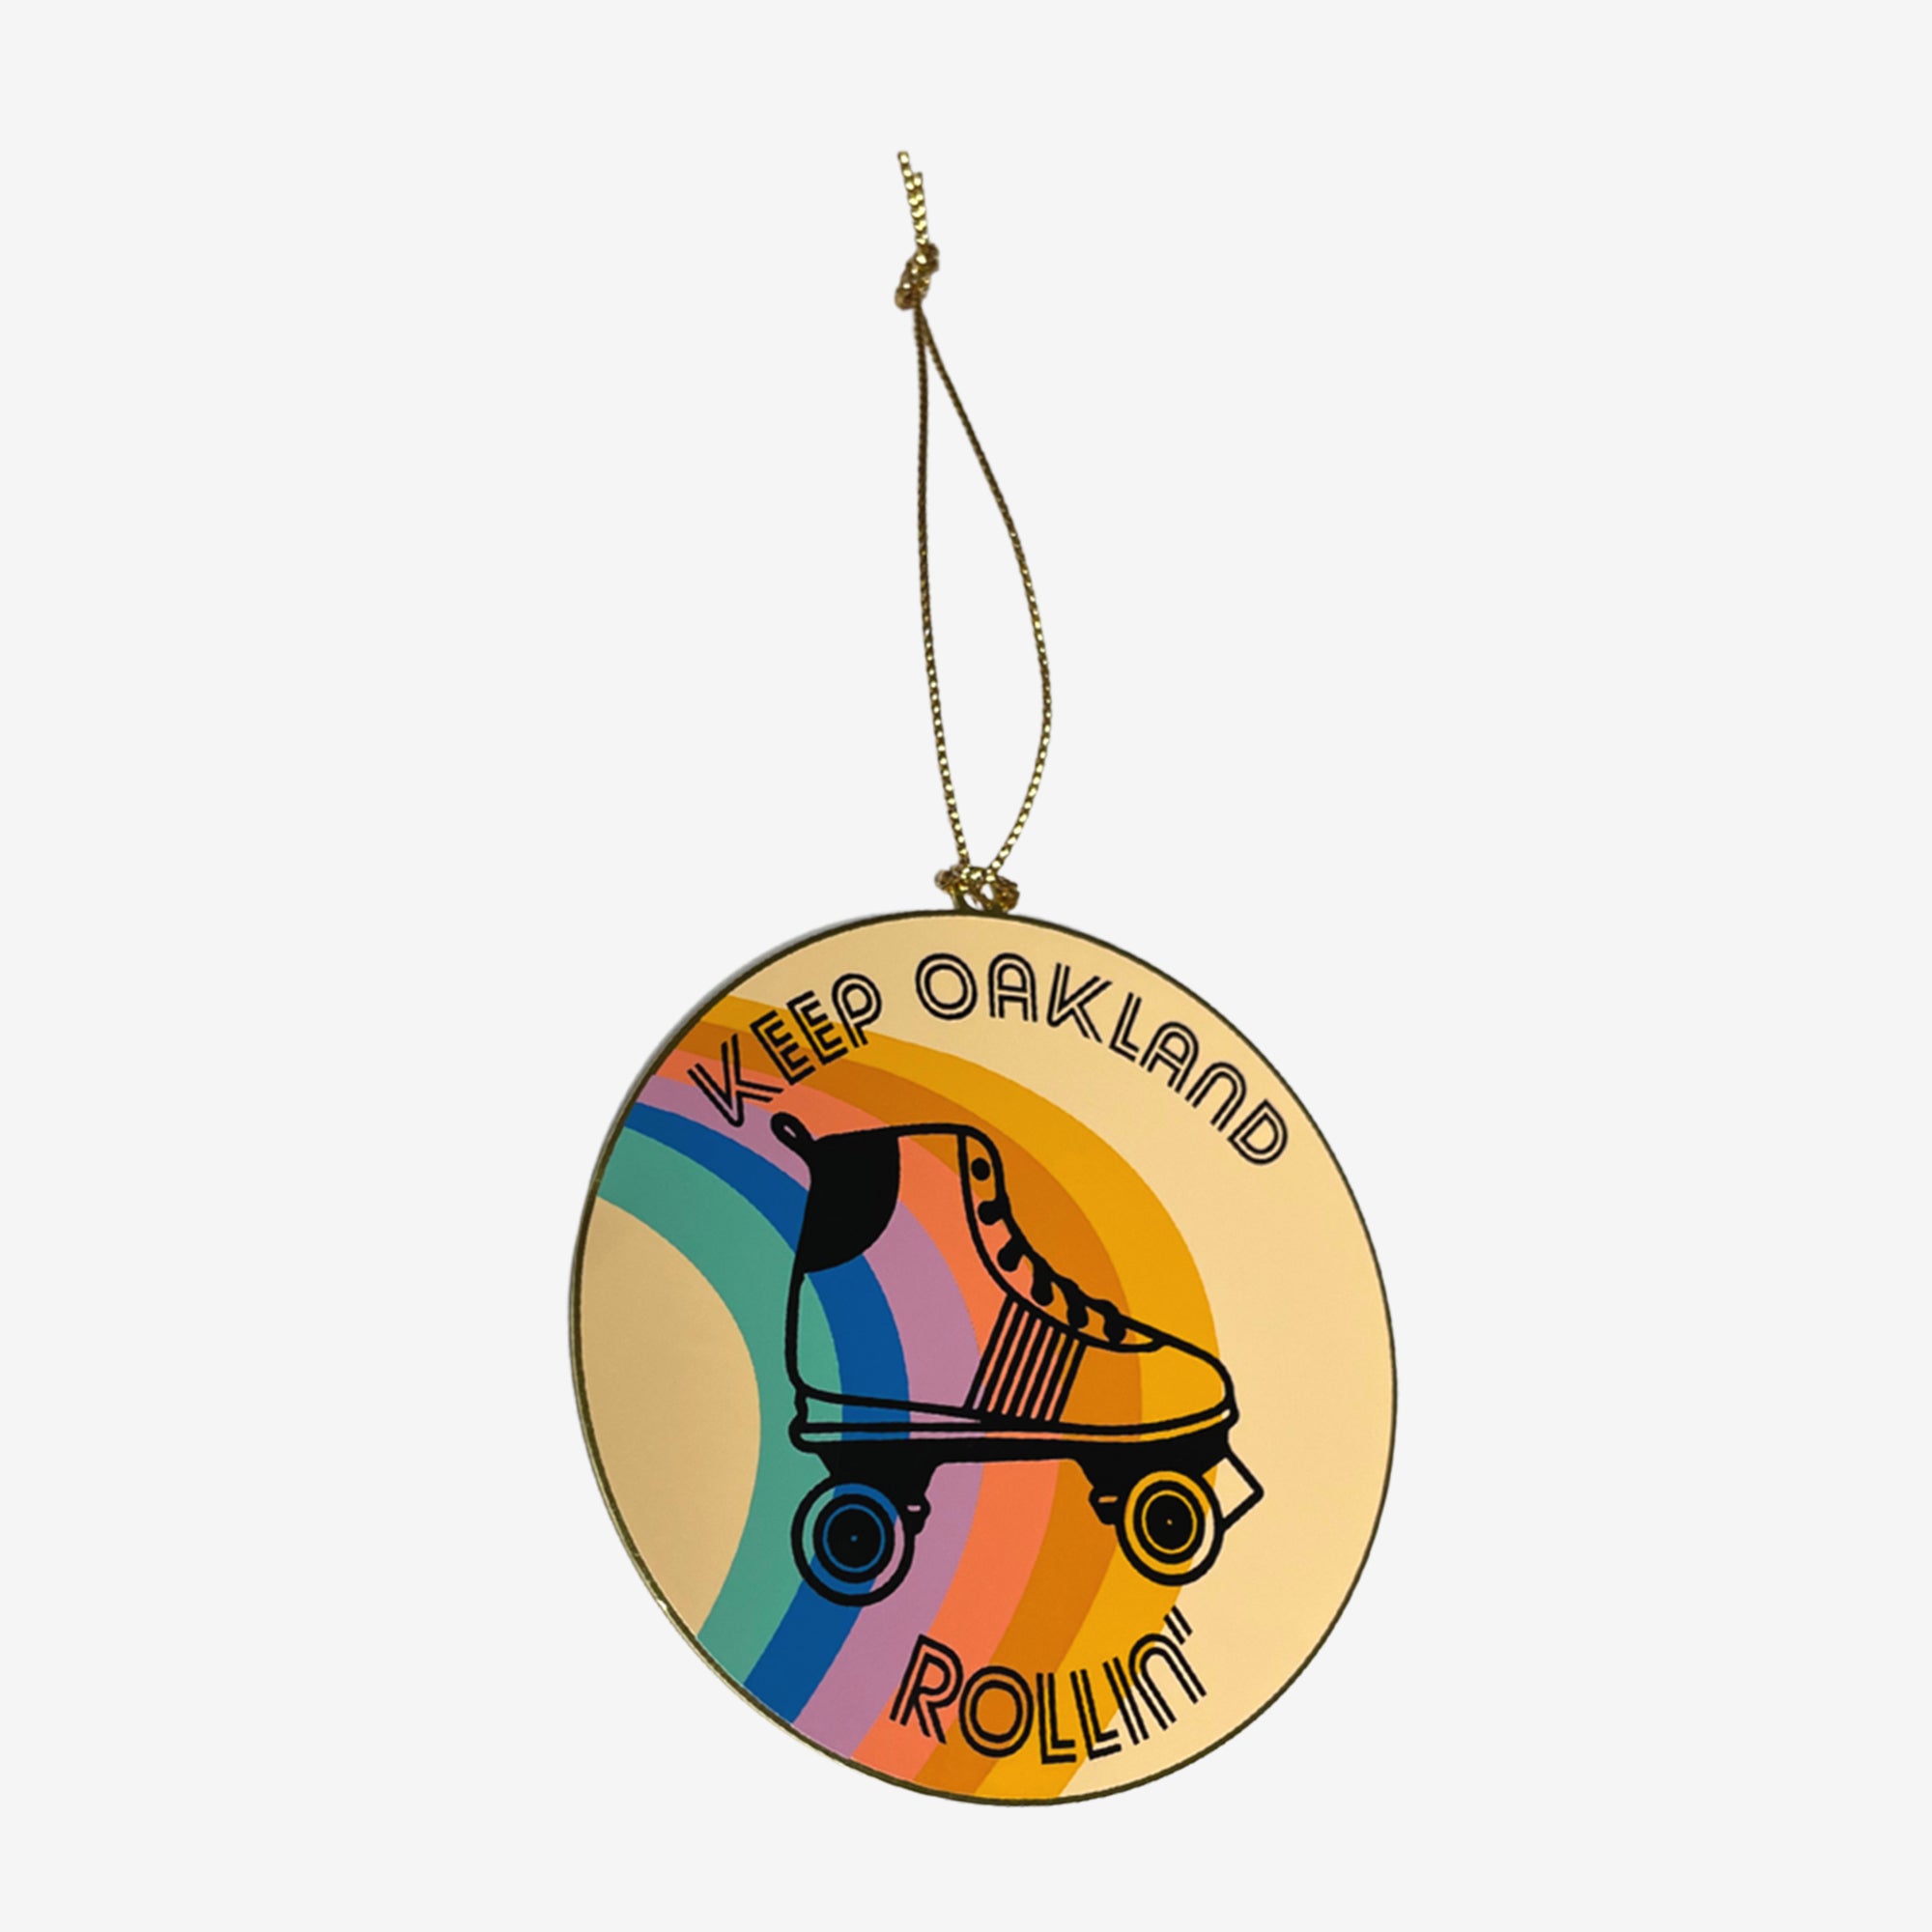 Keep Oakland Free holiday tree ornament with an illustration of a roller skate on a muted rainbow-colored circular disc.